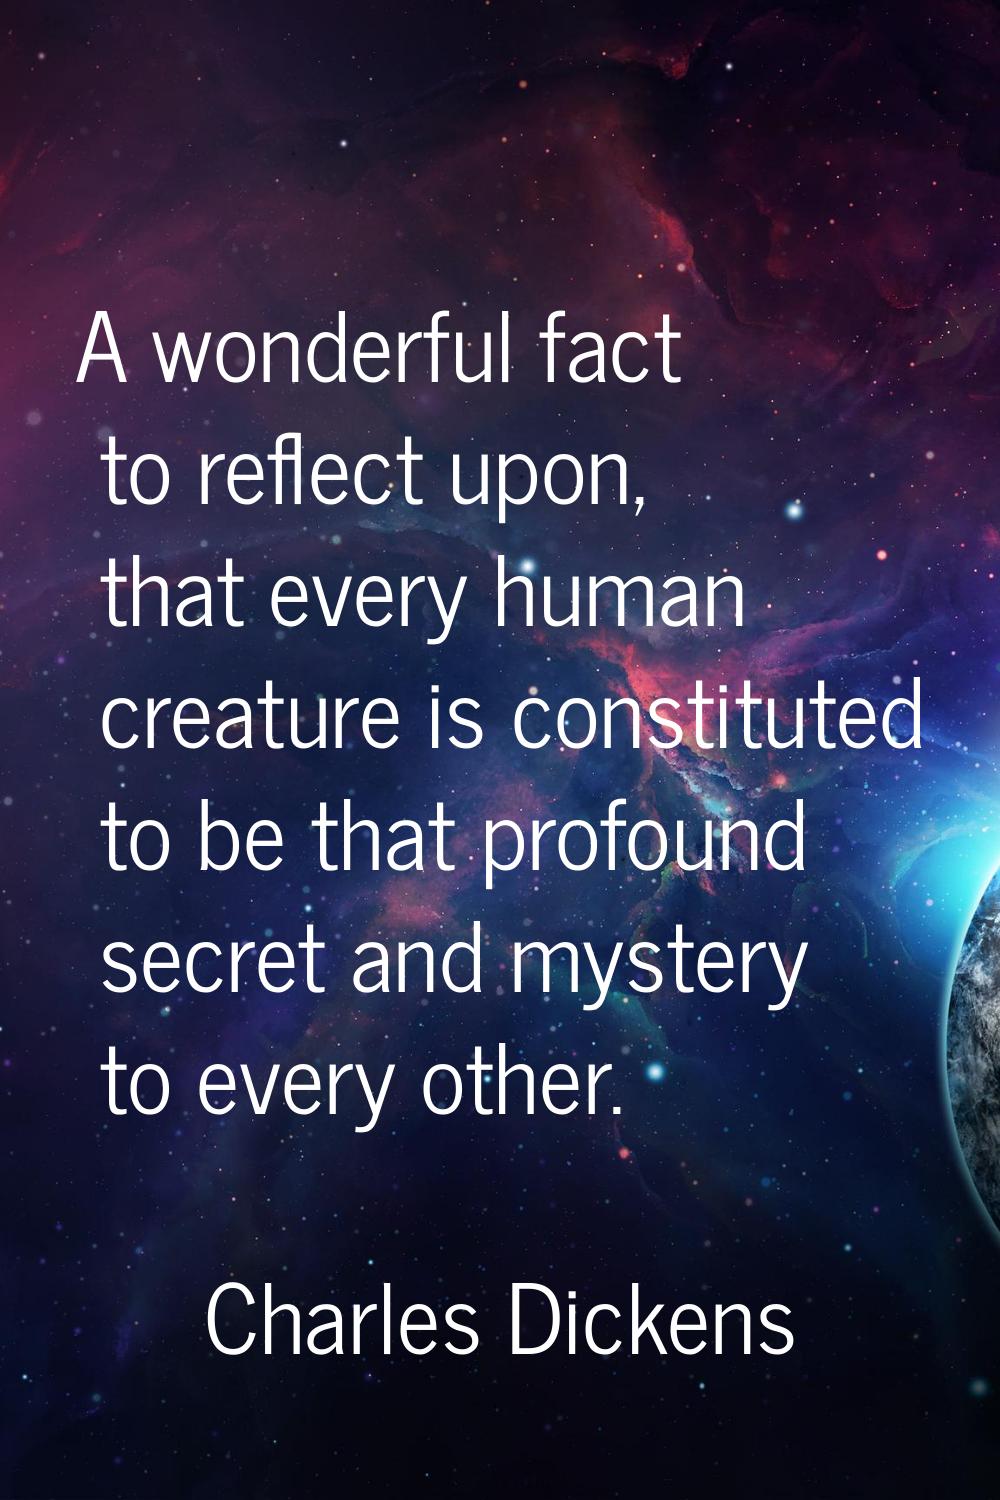 A wonderful fact to reflect upon, that every human creature is constituted to be that profound secr